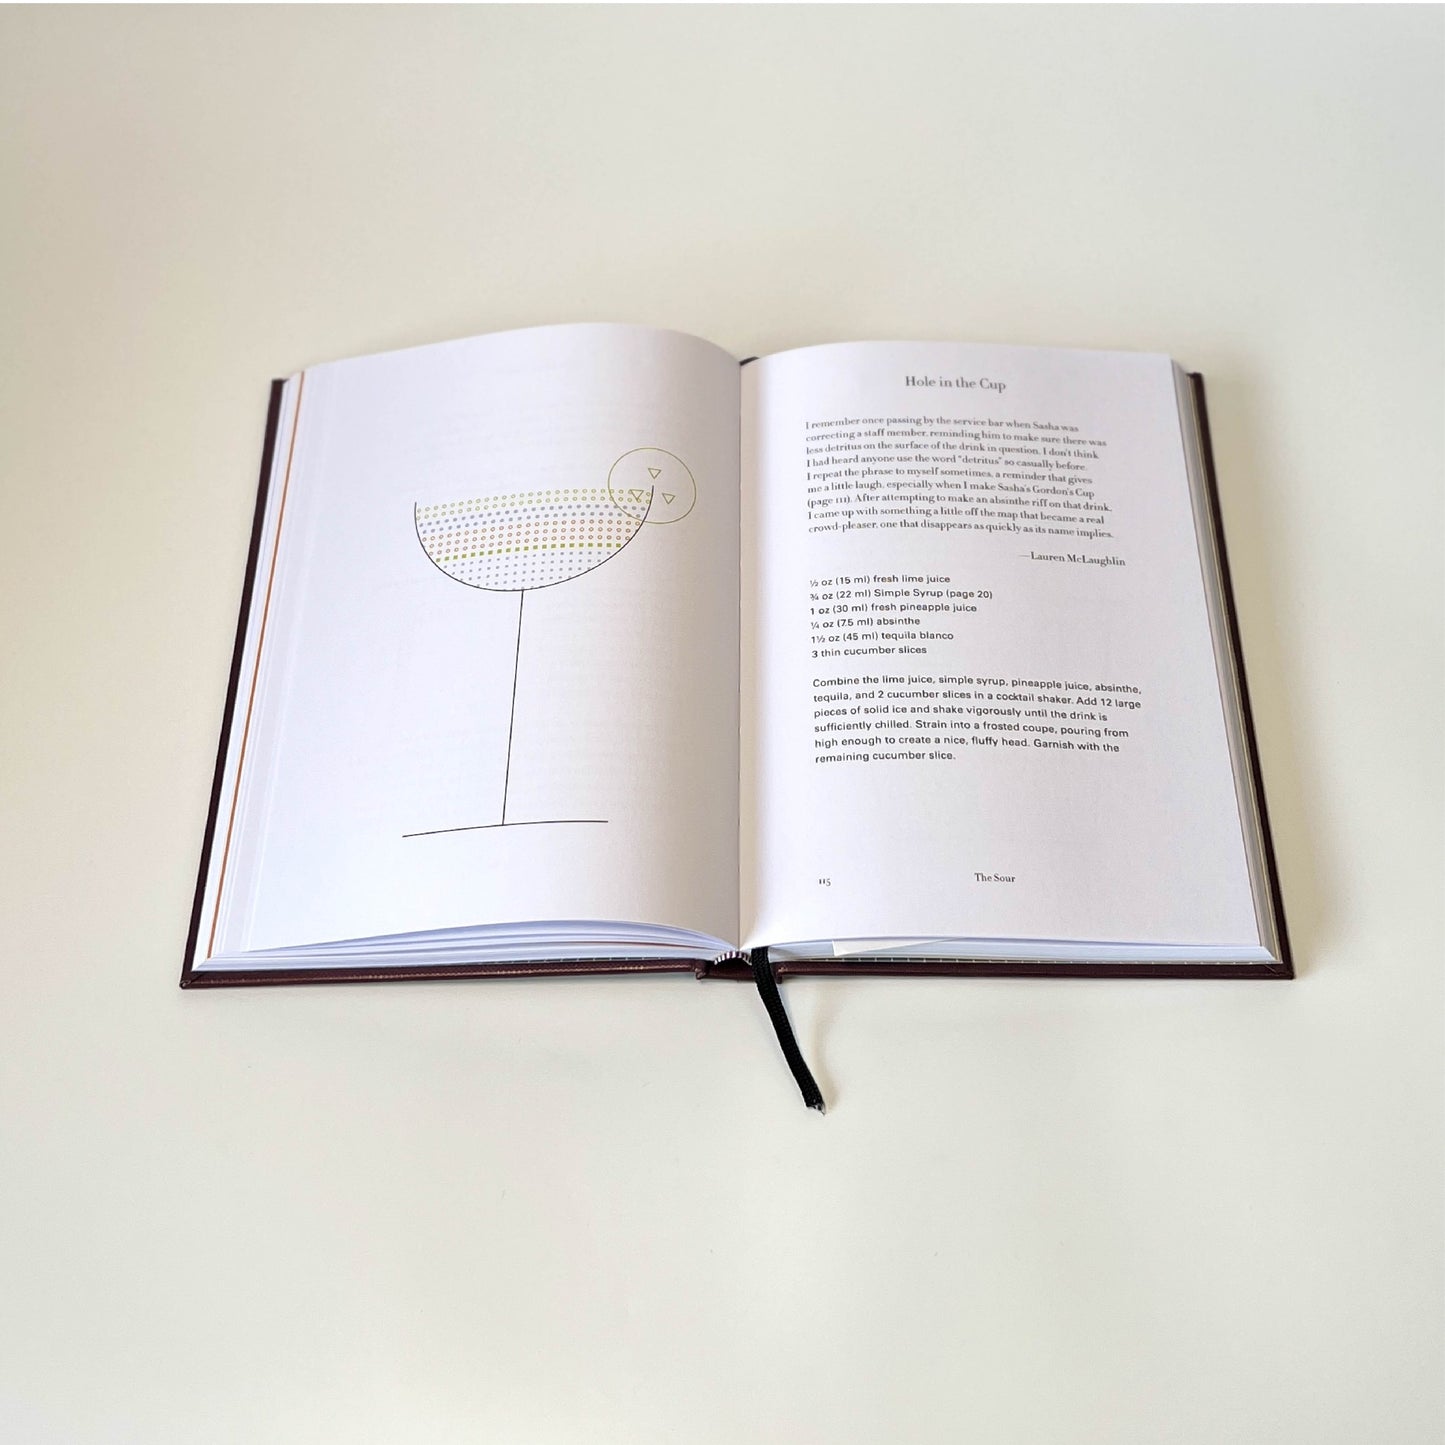 A Culinary Collection from Around the World - by Phaidon Press